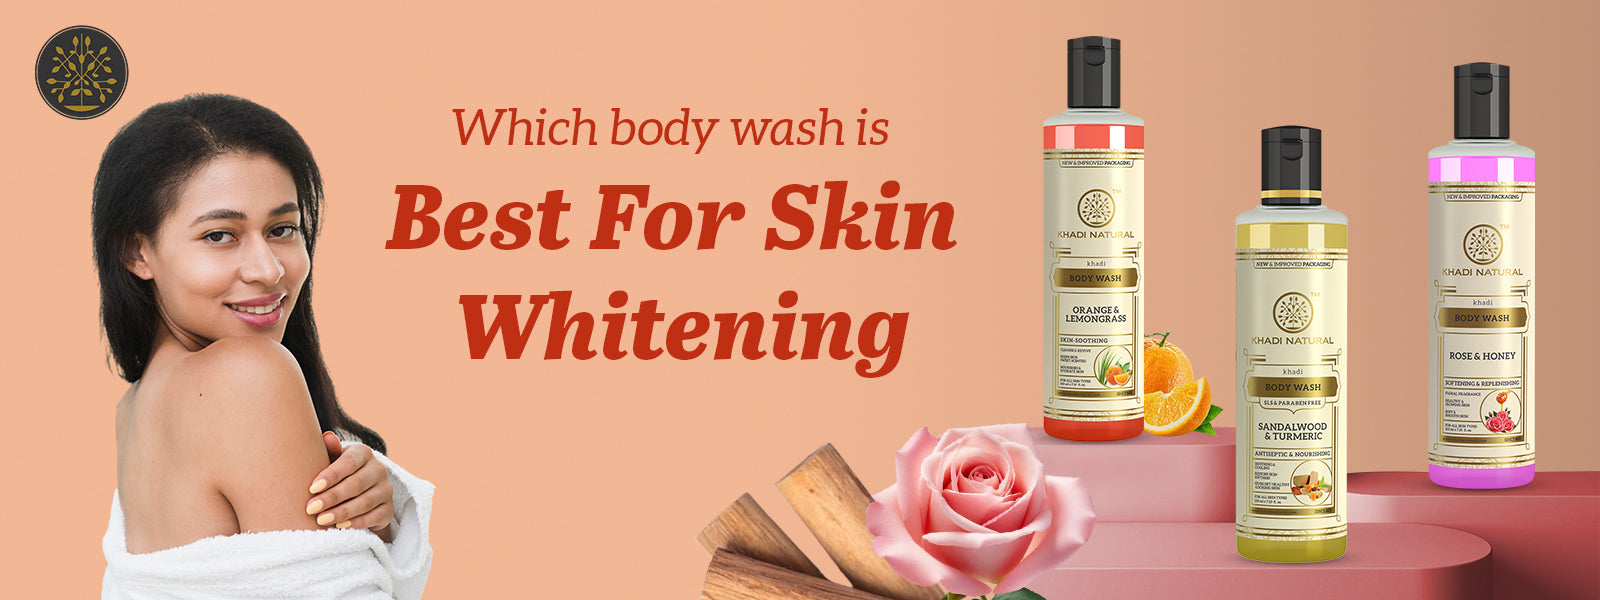 Which body wash is best for skin whitening